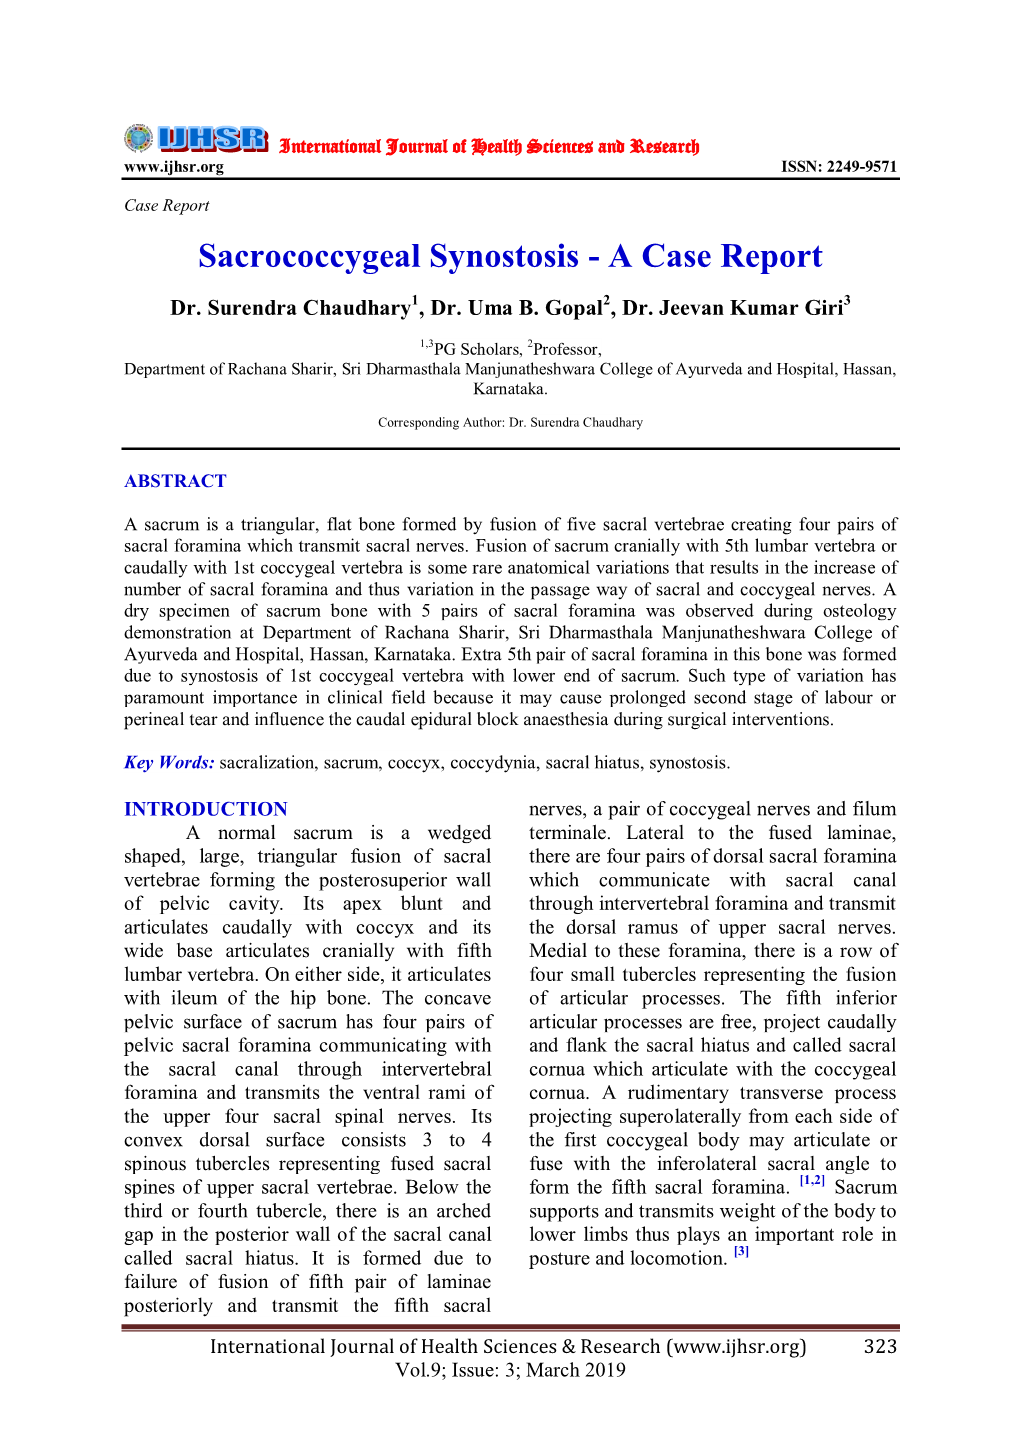 Sacrococcygeal Synostosis - a Case Report